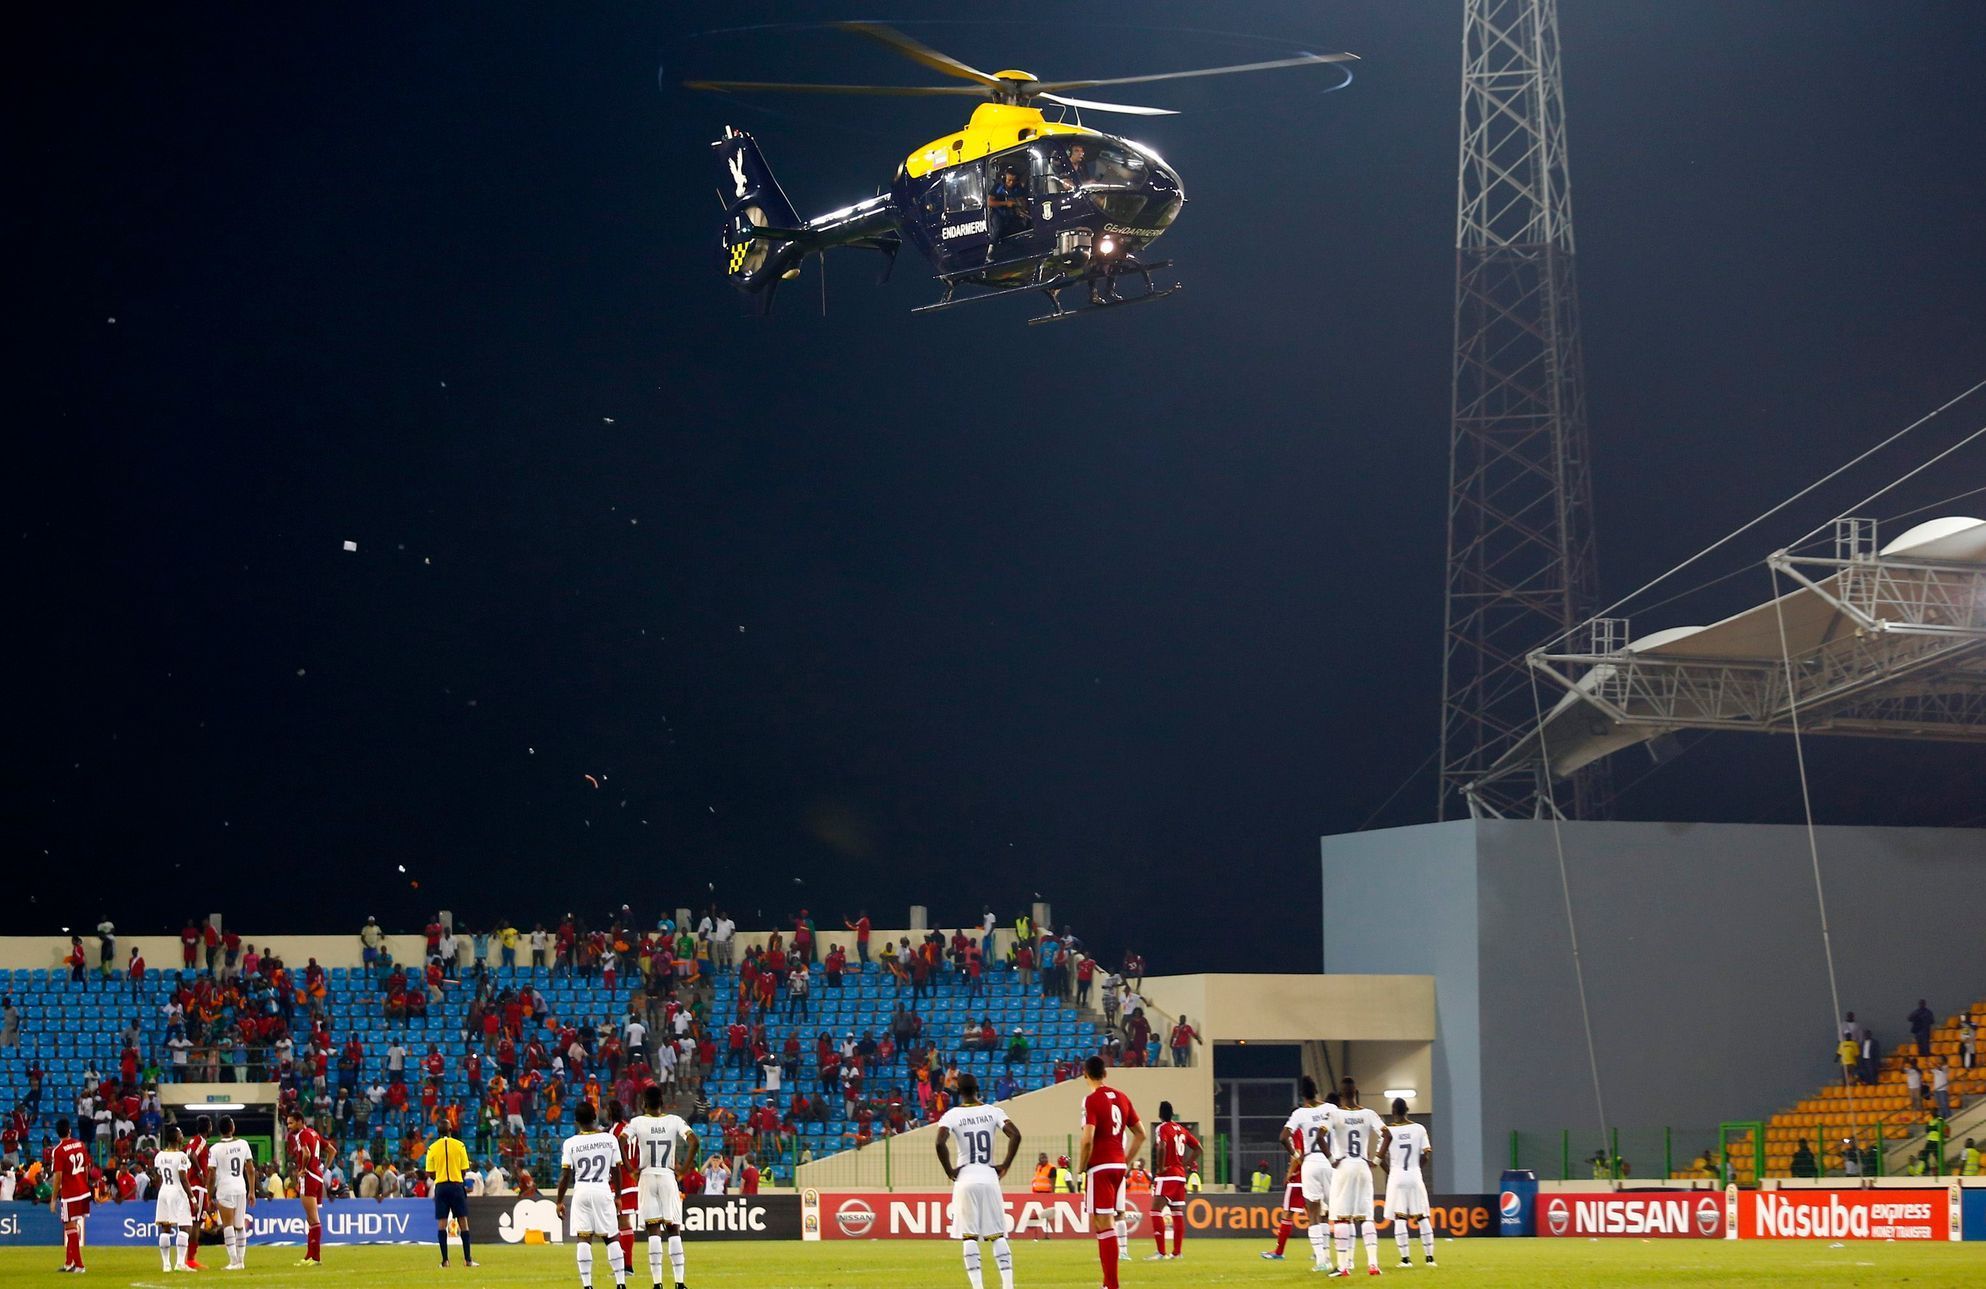 A police helicopter hovers over the pitch as Equitorial Guinea fans throw objects during the 2015 African Cup of Nations semi-final soccer match against Ghana in Malabo